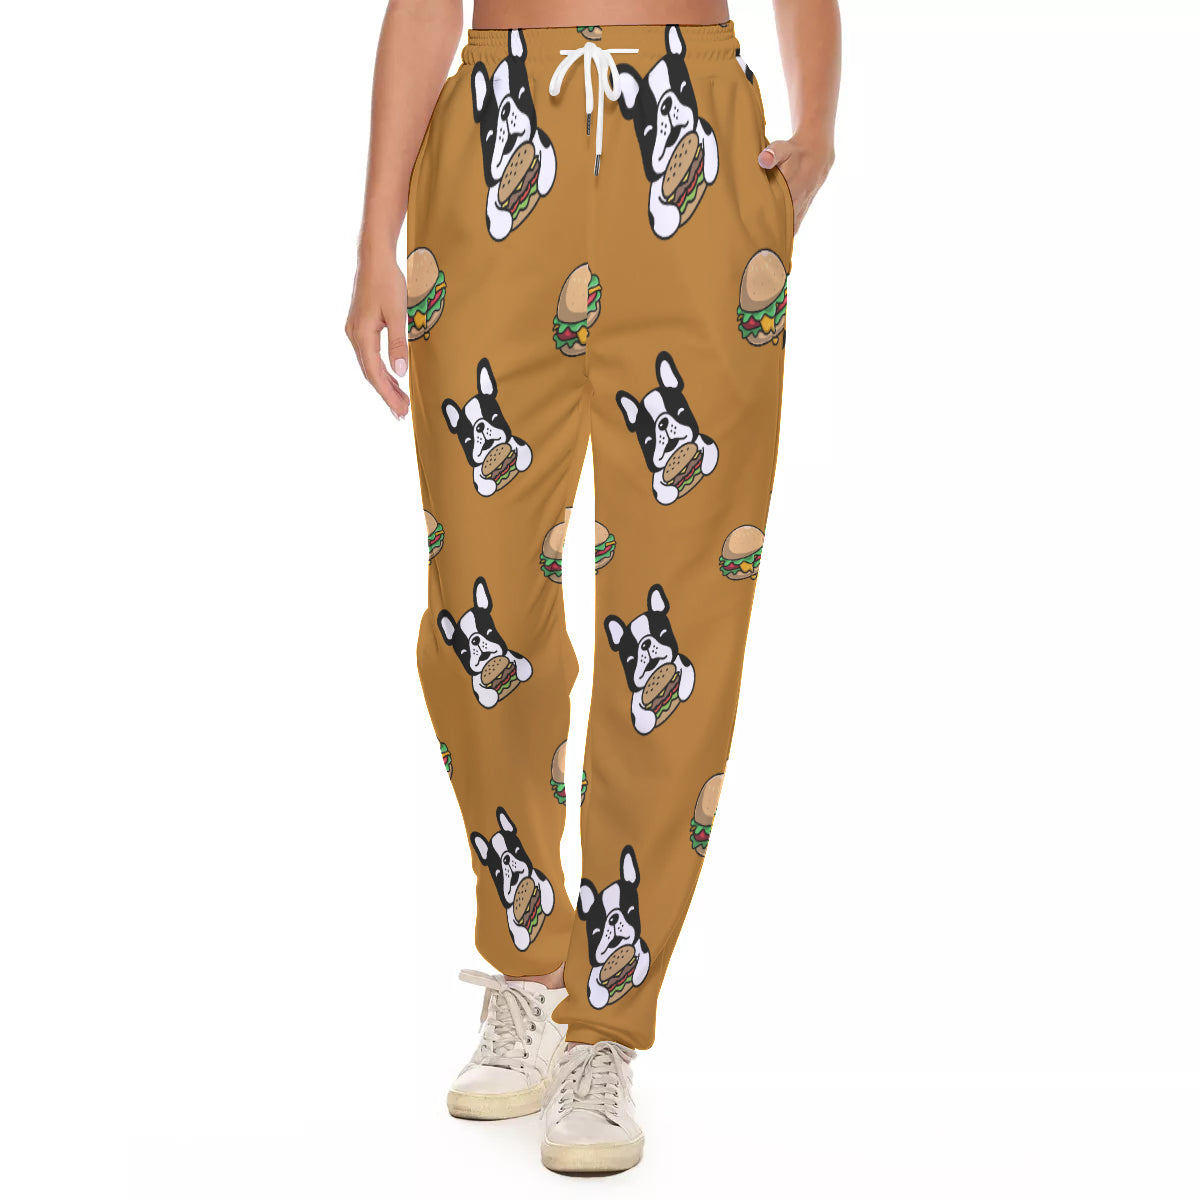 TILLY - Women's Casual Pants - Frenchie Bulldog Shop